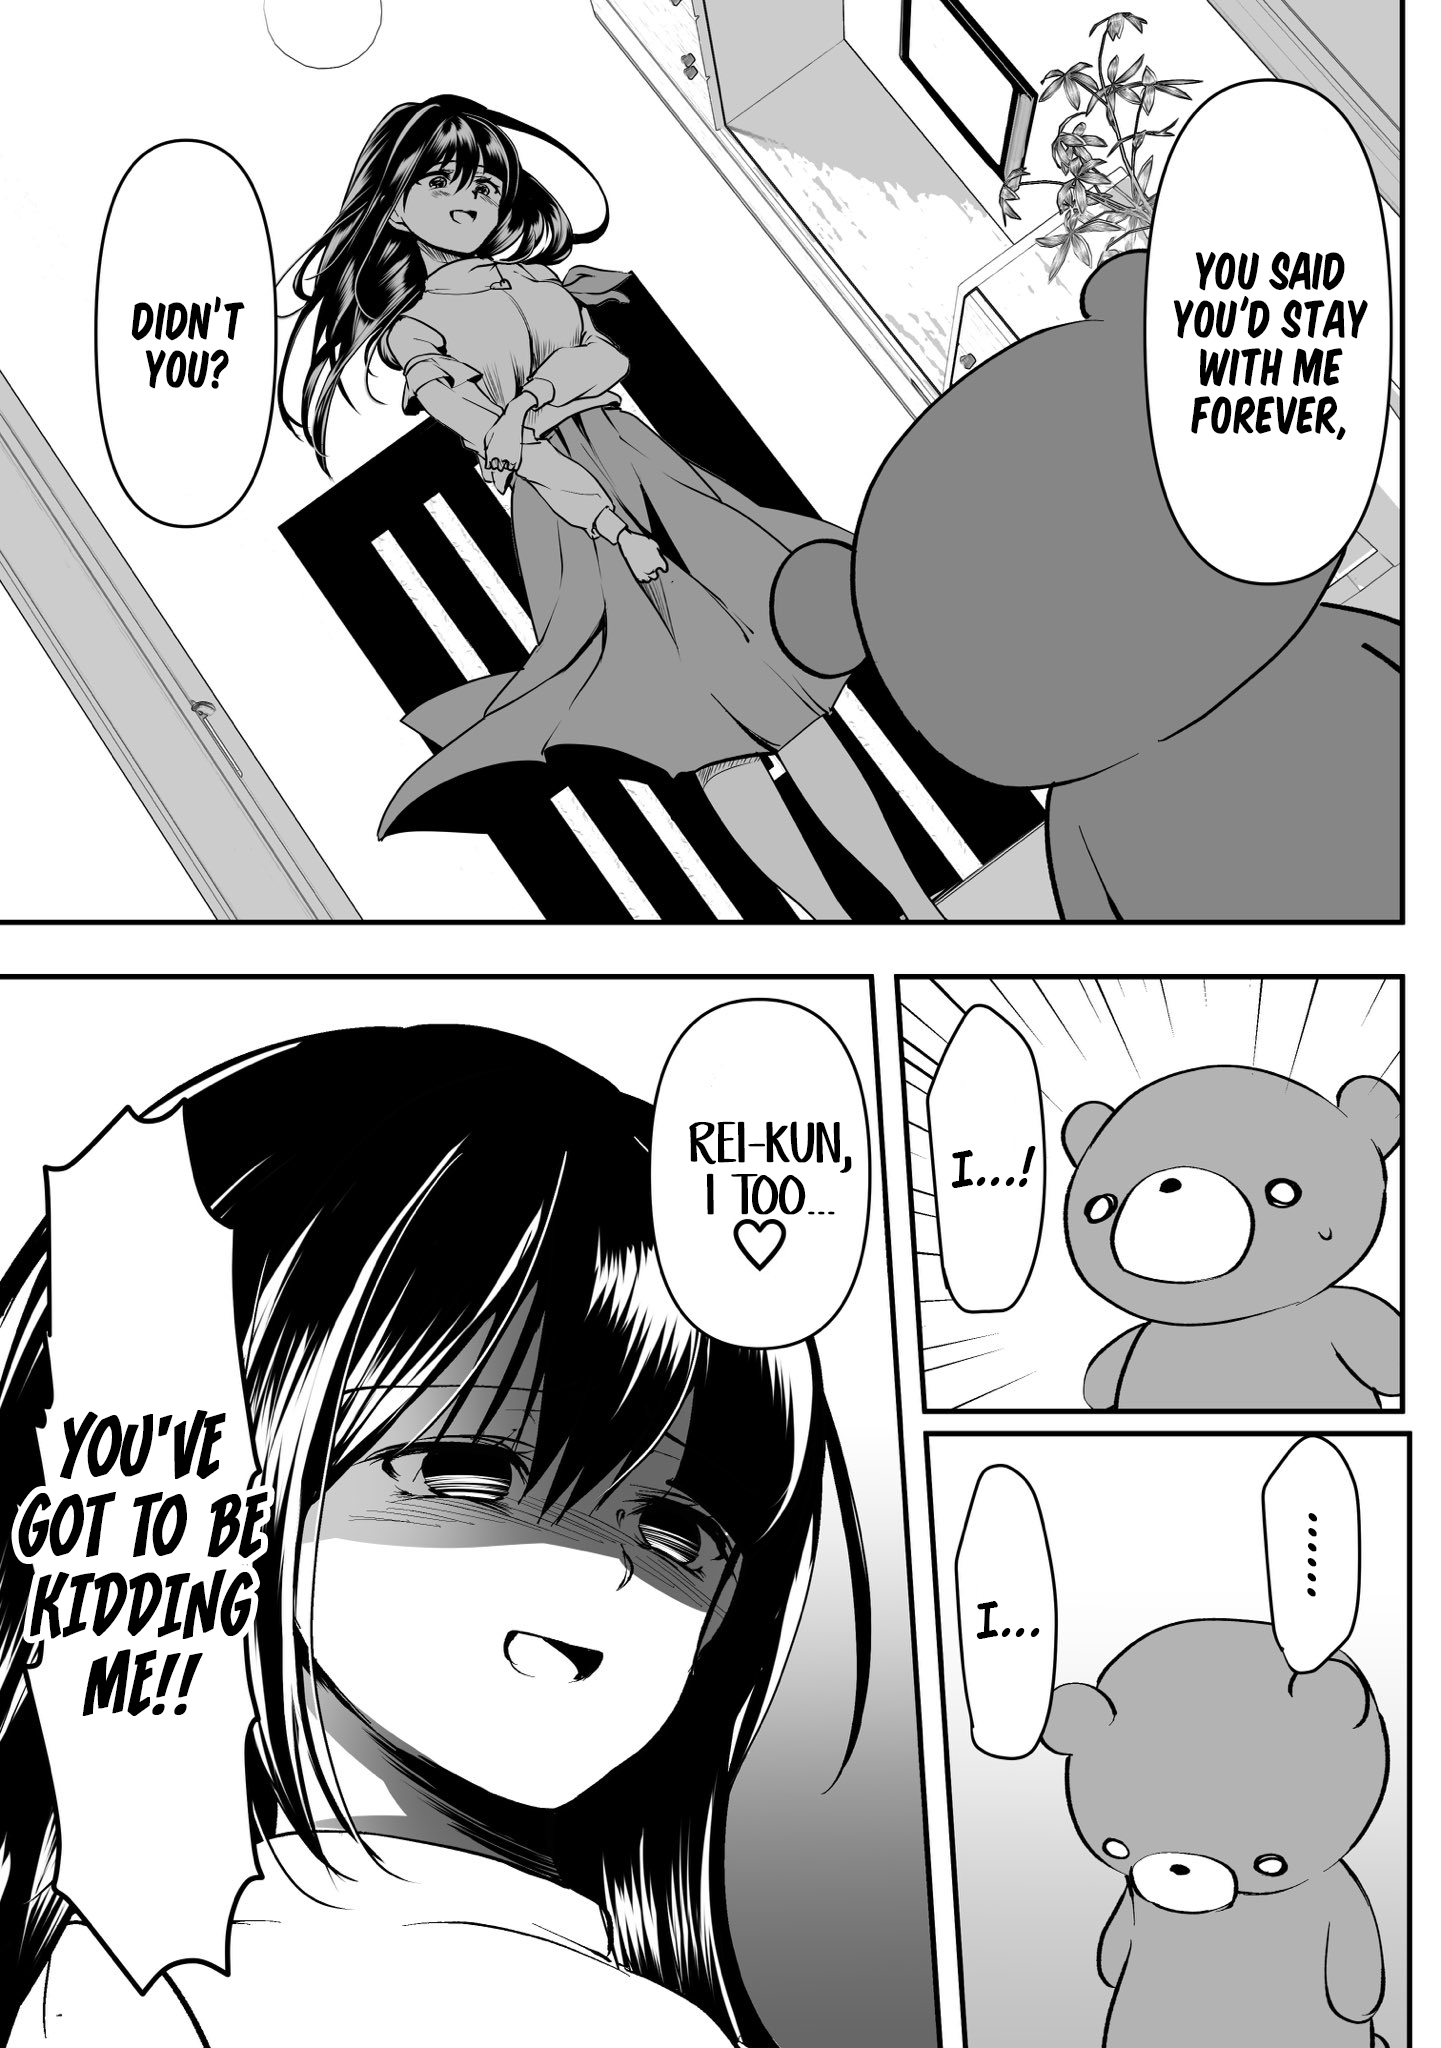 My Yandere Girlfriend Won't Let Me Rest In Peace - Page 1